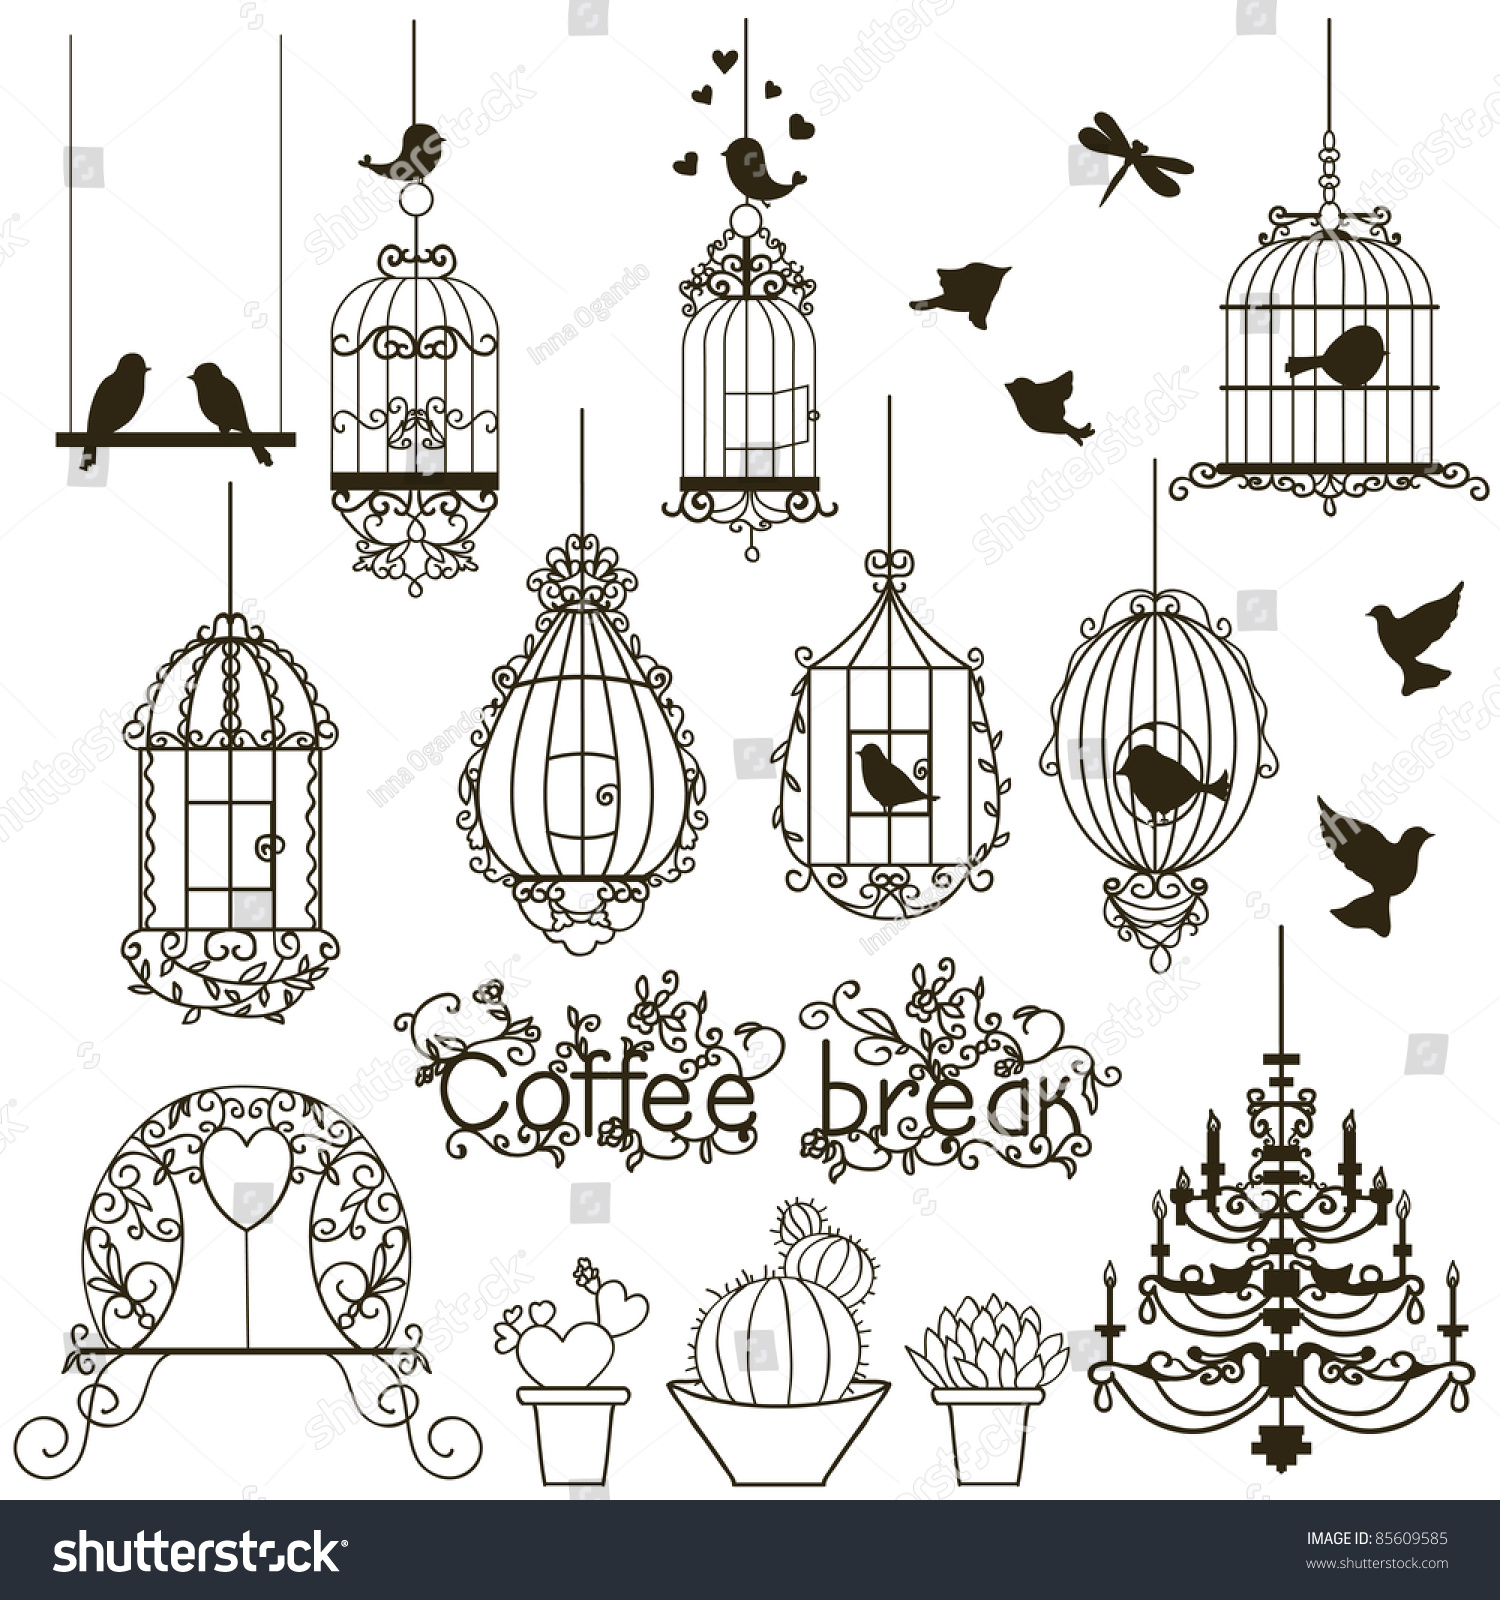 eps clipart collection - photo #24